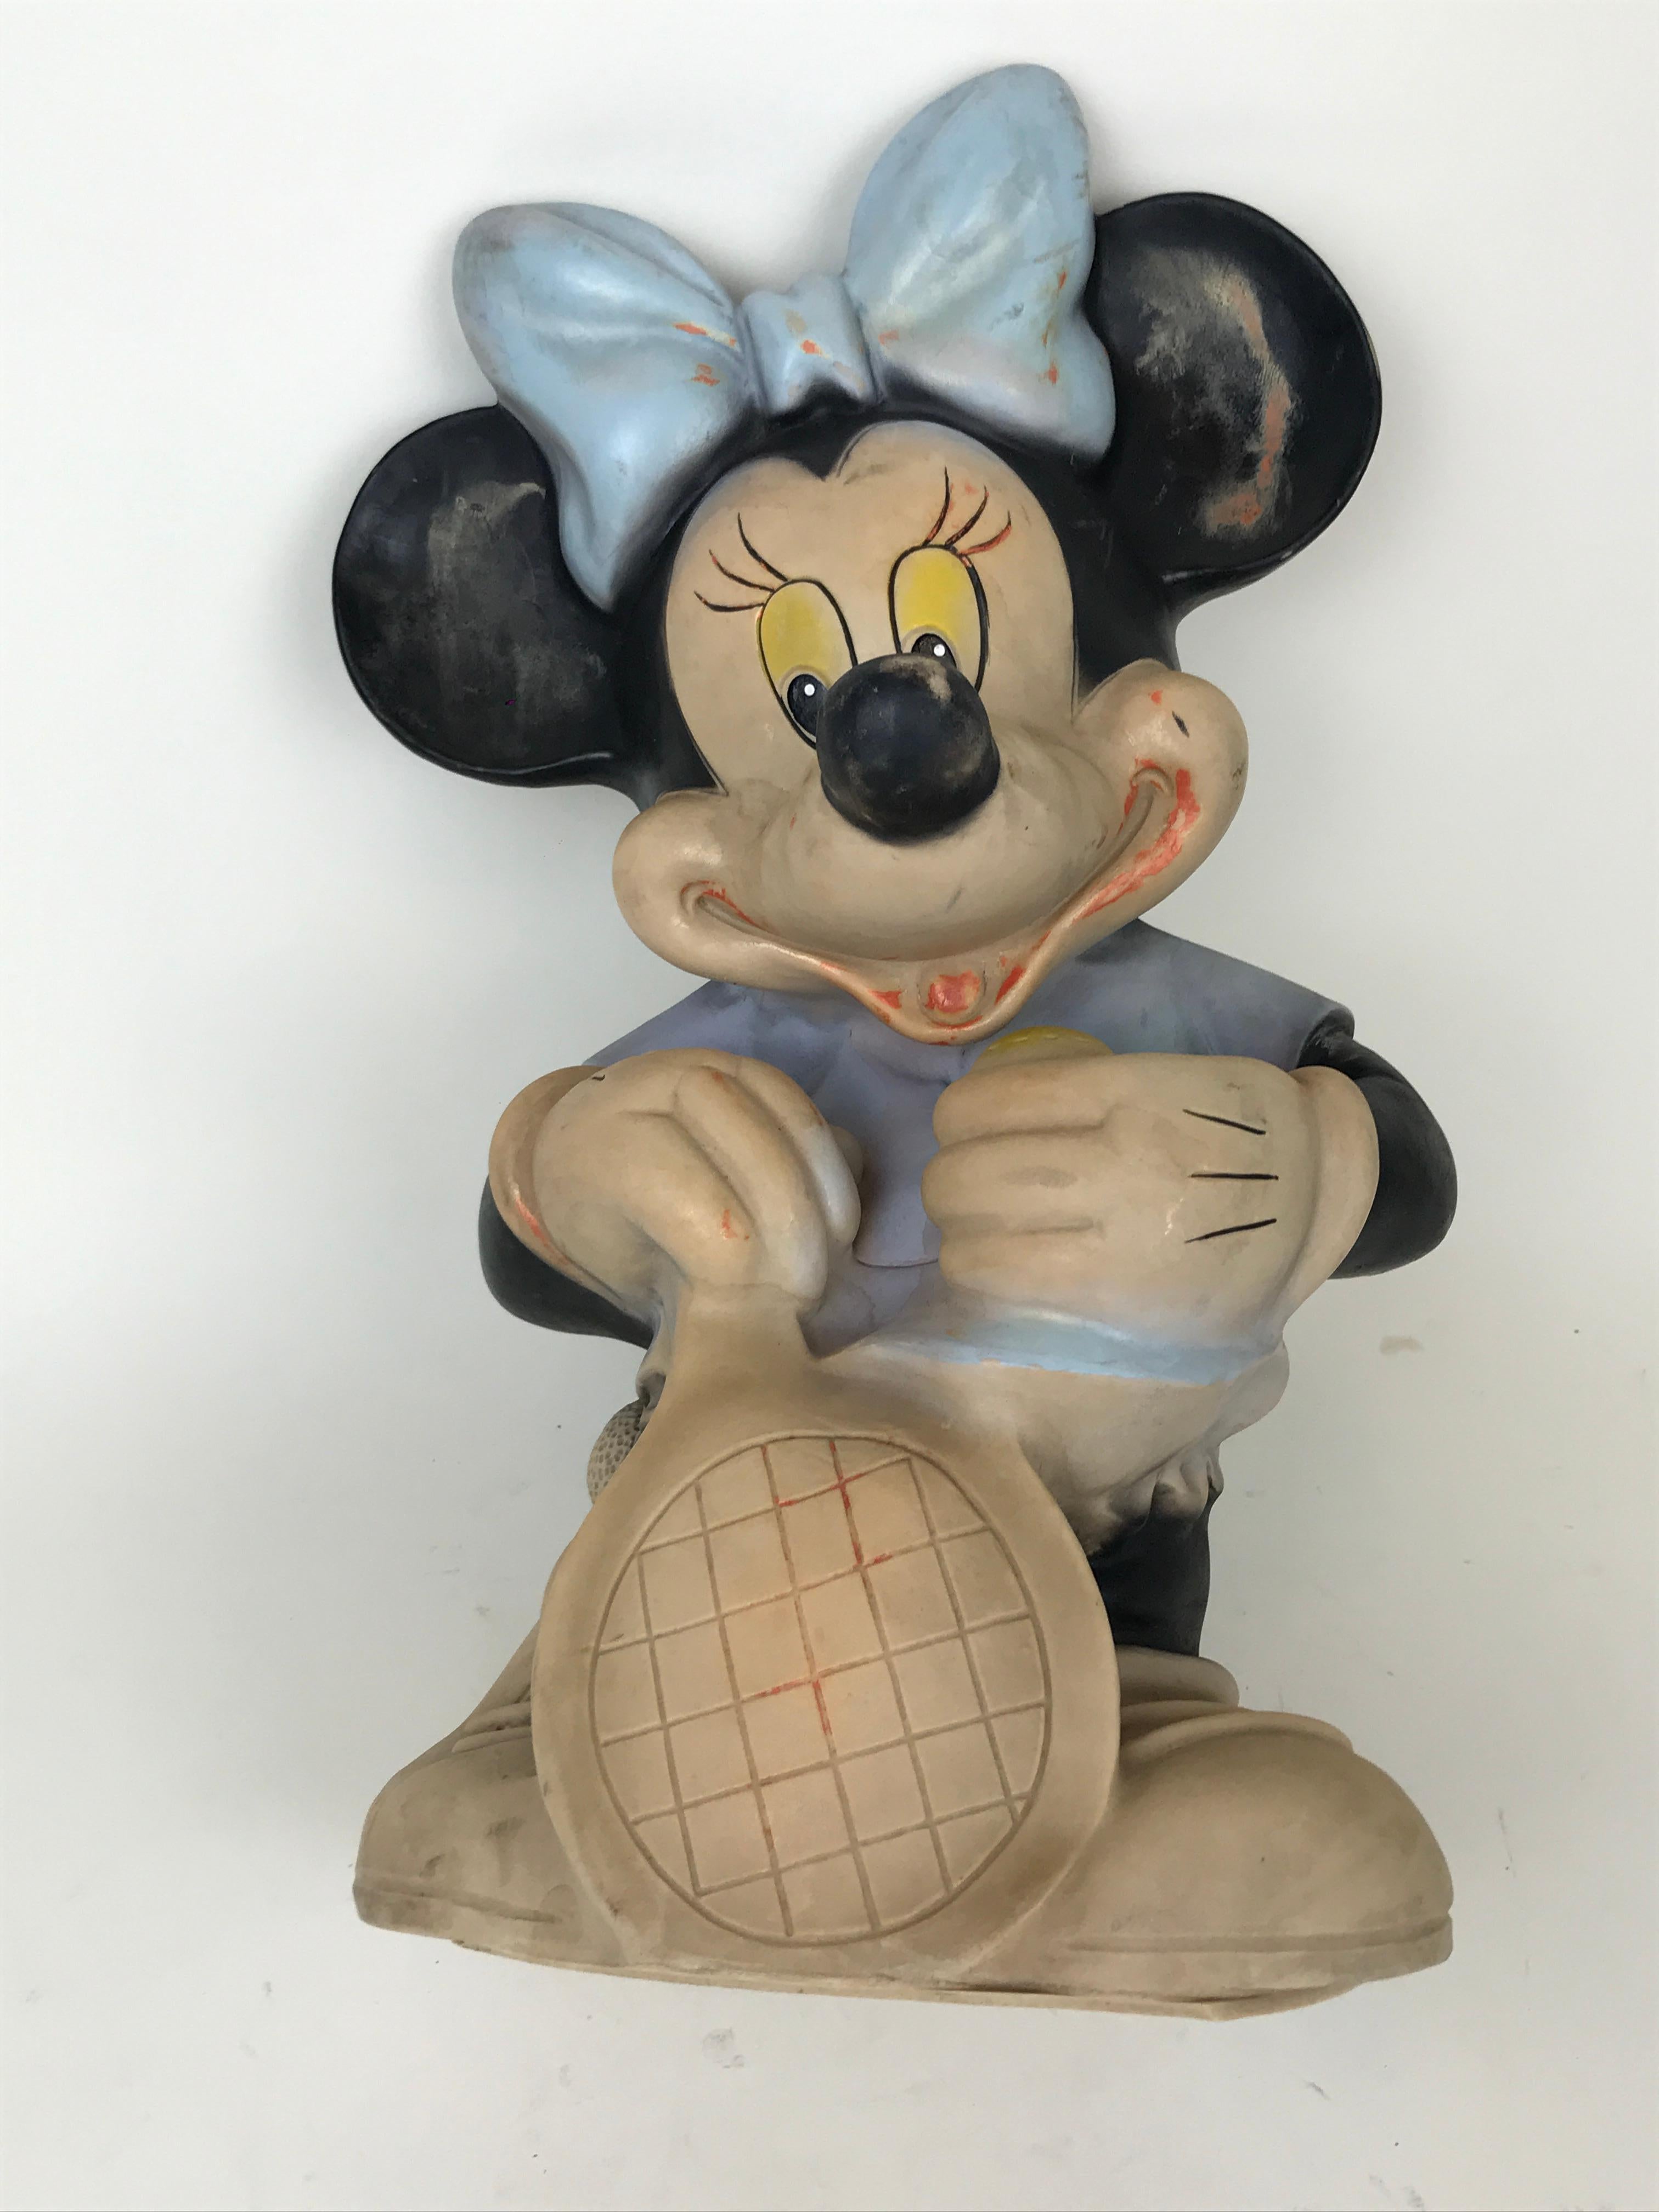 Very rare vintage Diseny Minnie Mouse with tennis racquet squeak rubber toy made by Biserka in ex Yugoslavia now Croatia in the 1960s.

Marked 